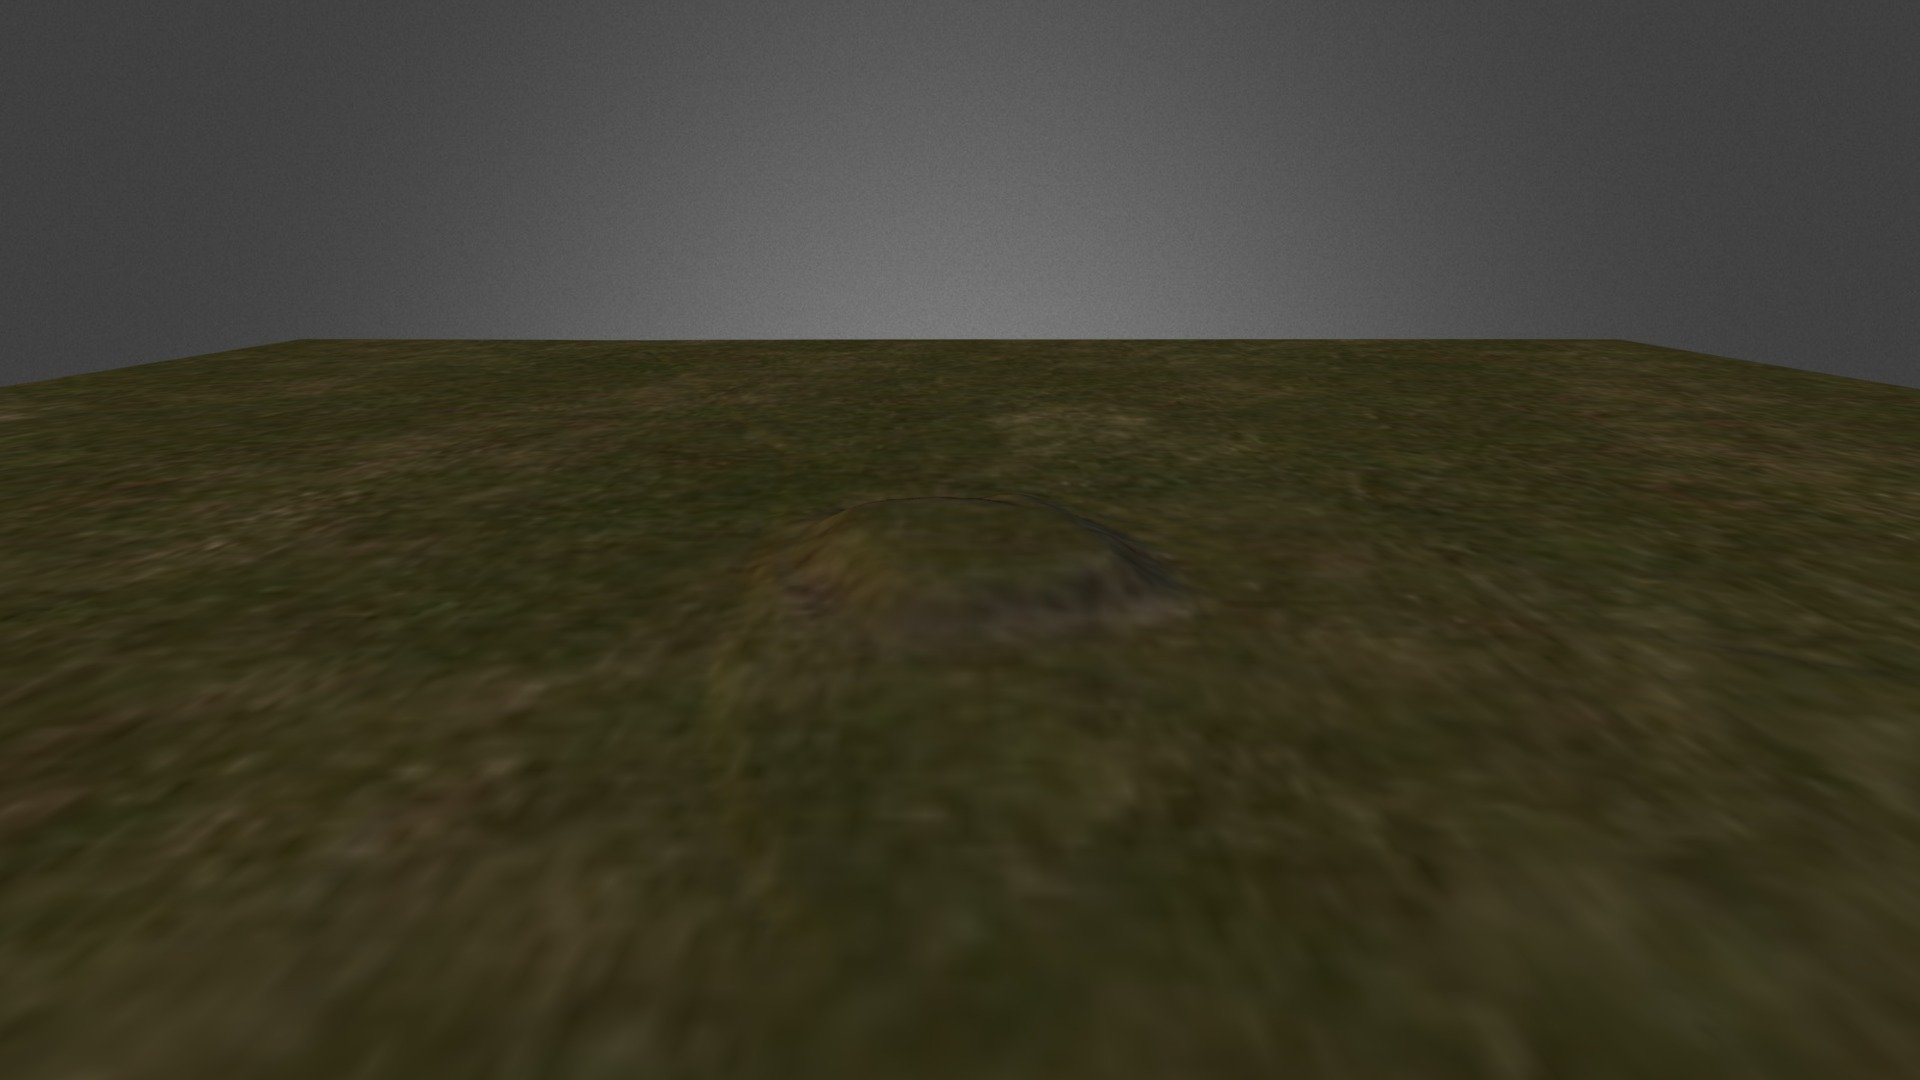 Simple terrain model of Mont Helena Mound site in Mississippi. Created in L3DT from DEM data exported from ArcMap 3d model